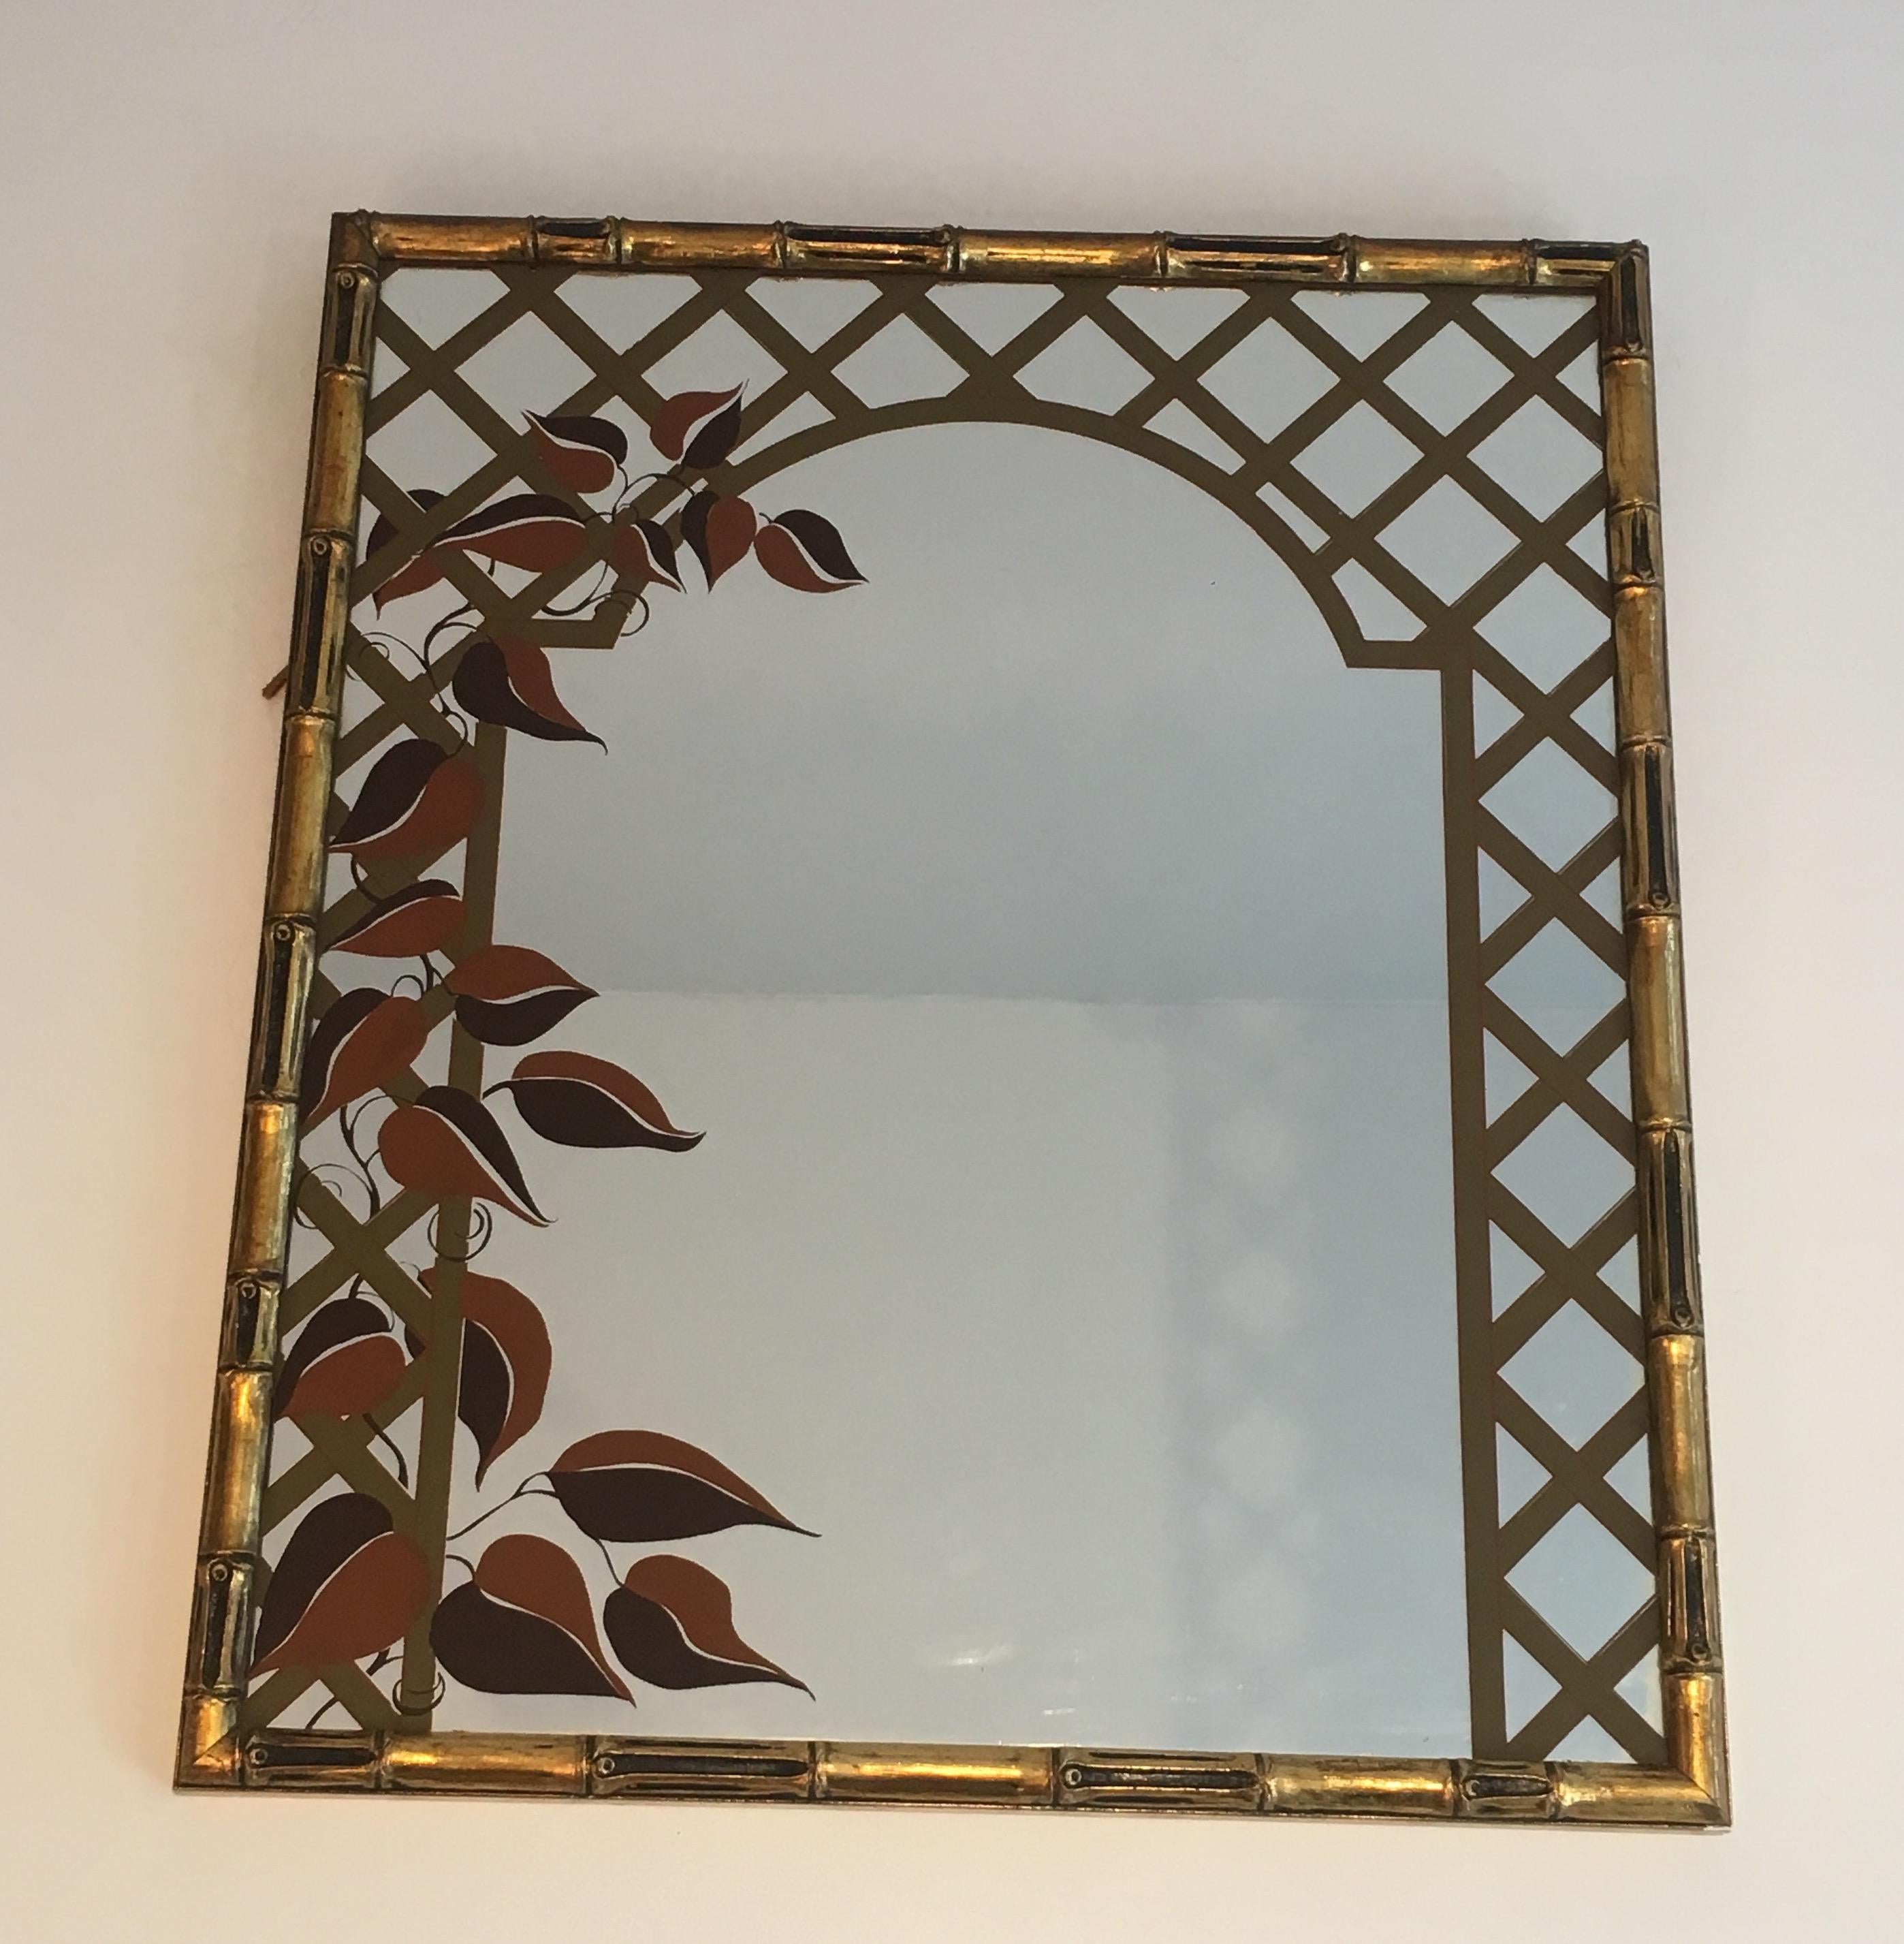 Decorative Faux-Bamboo Gilt Wood Mirror with Printed Floral Decor, Circa 1970 For Sale 8